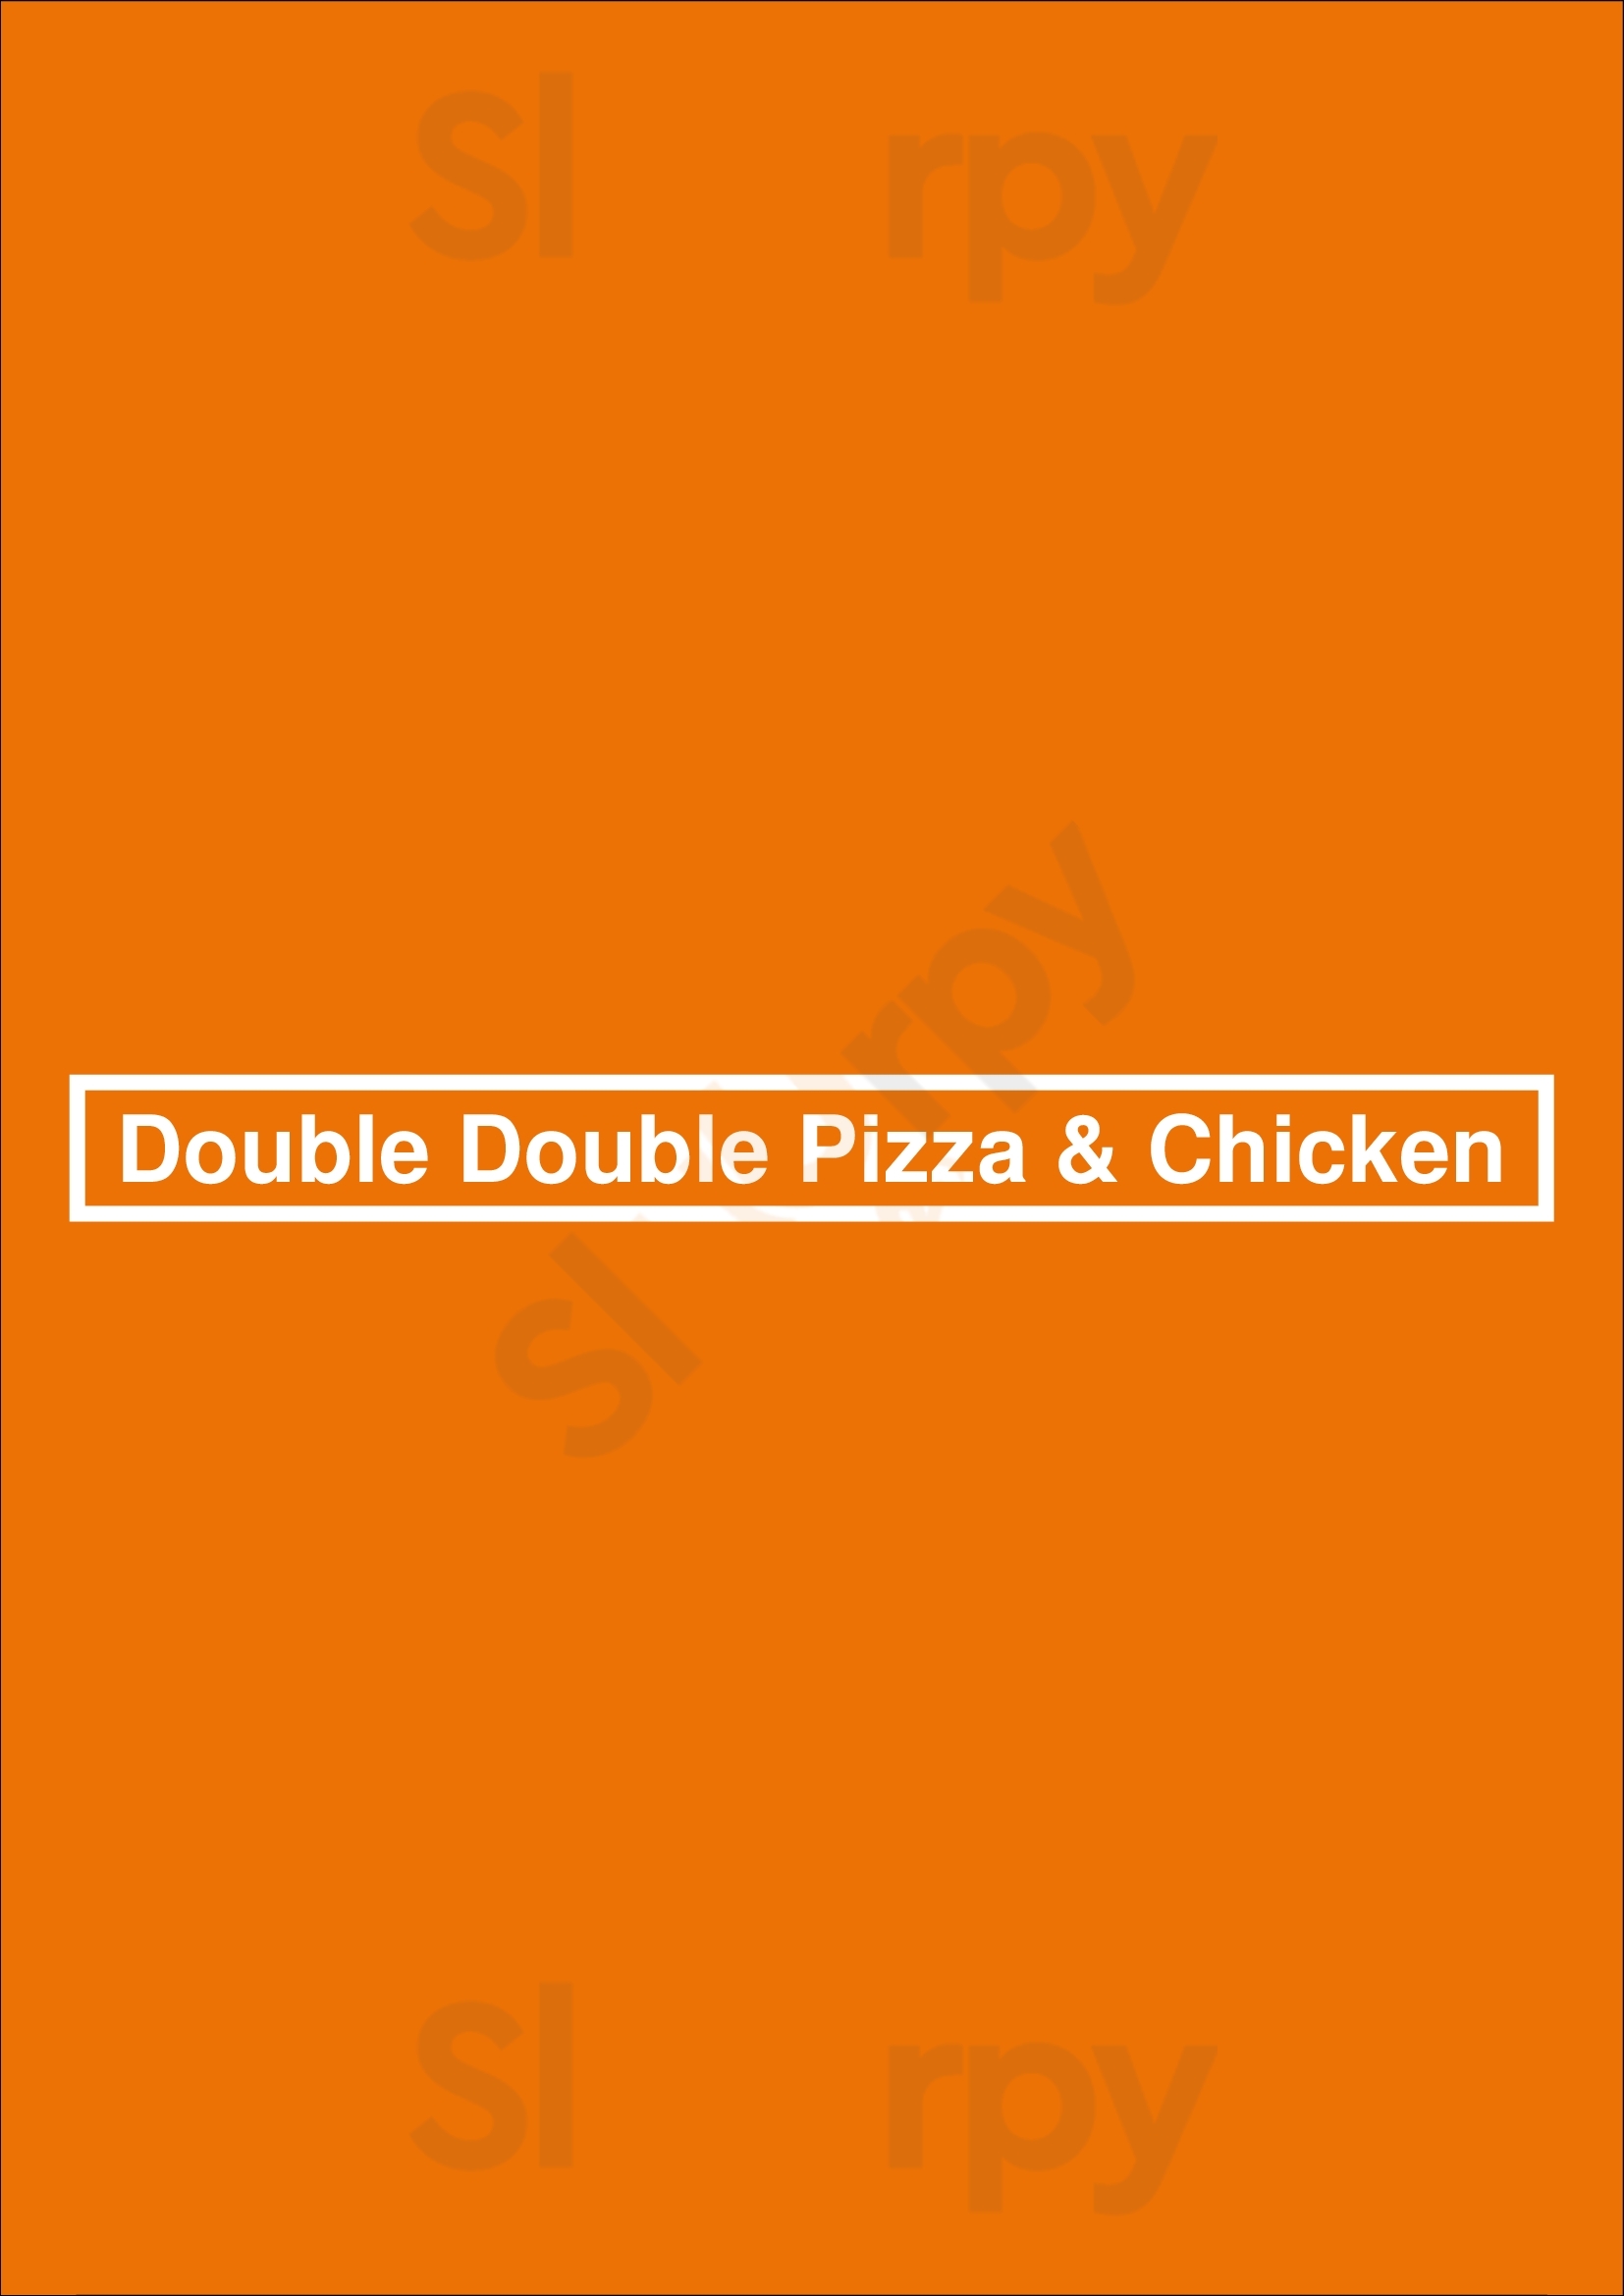 Double Double Pizza & Chicken Mississauga Menu - 1